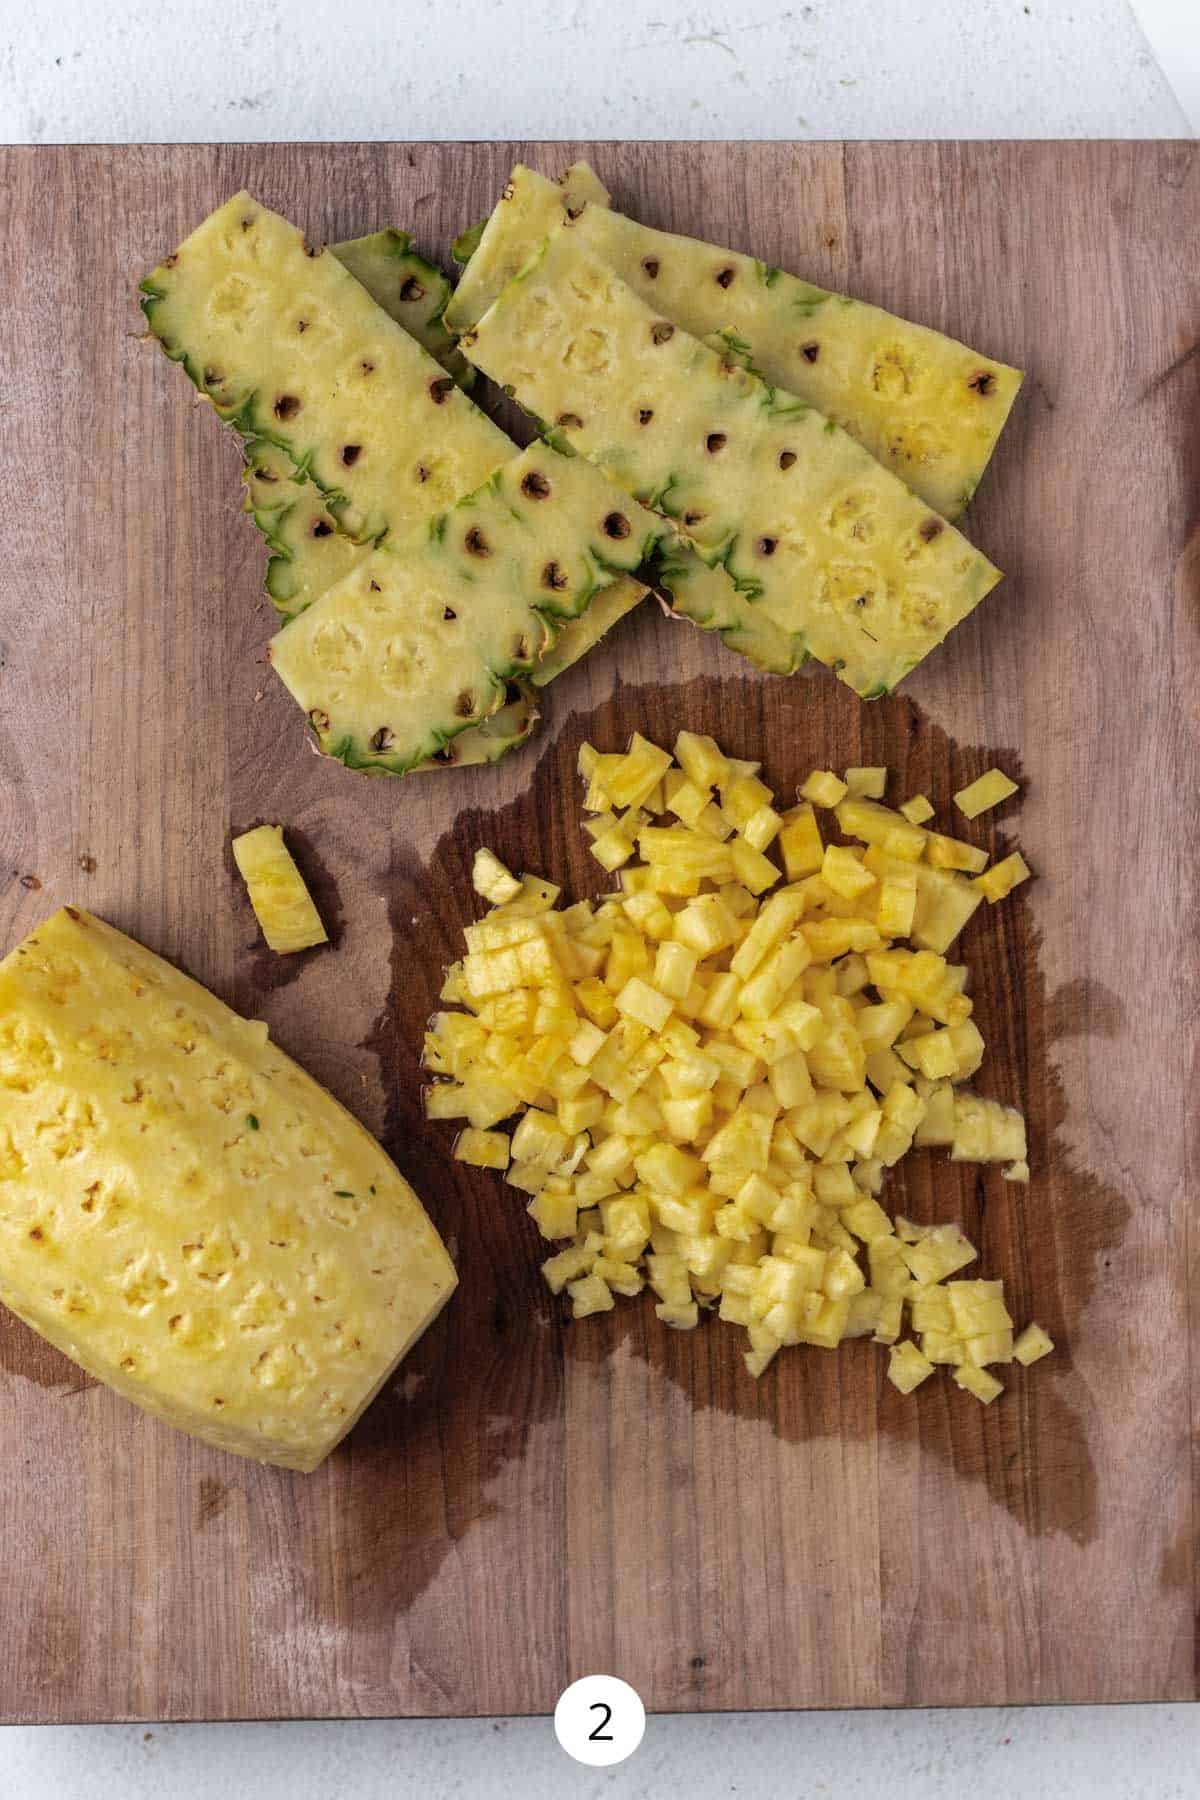 Peeled and chopped pineapple on a large wooden cutting board.